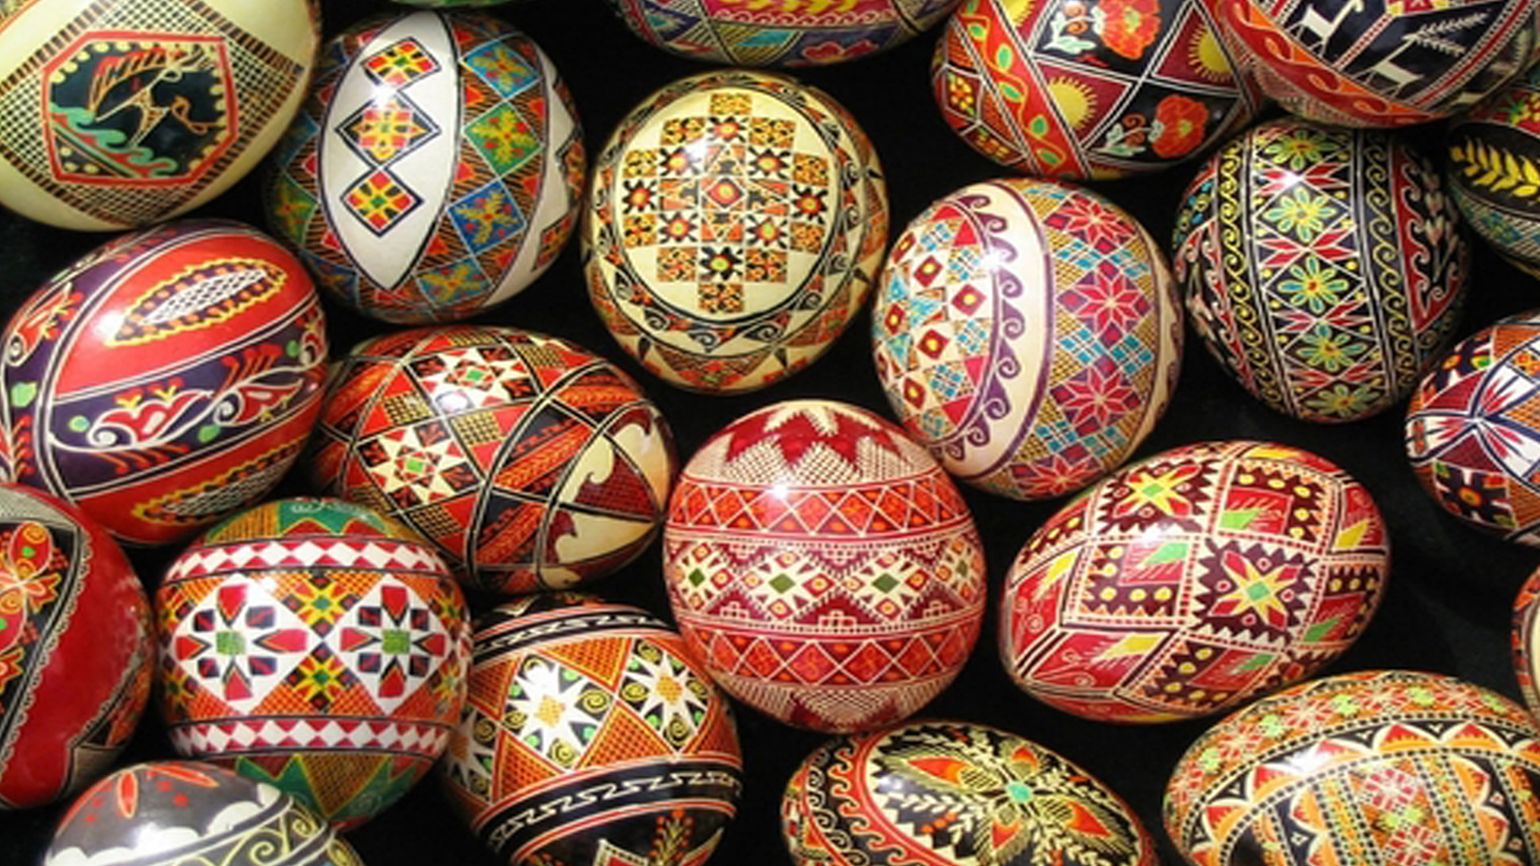 A collection of beautifully designed Easter eggs from Ukraine